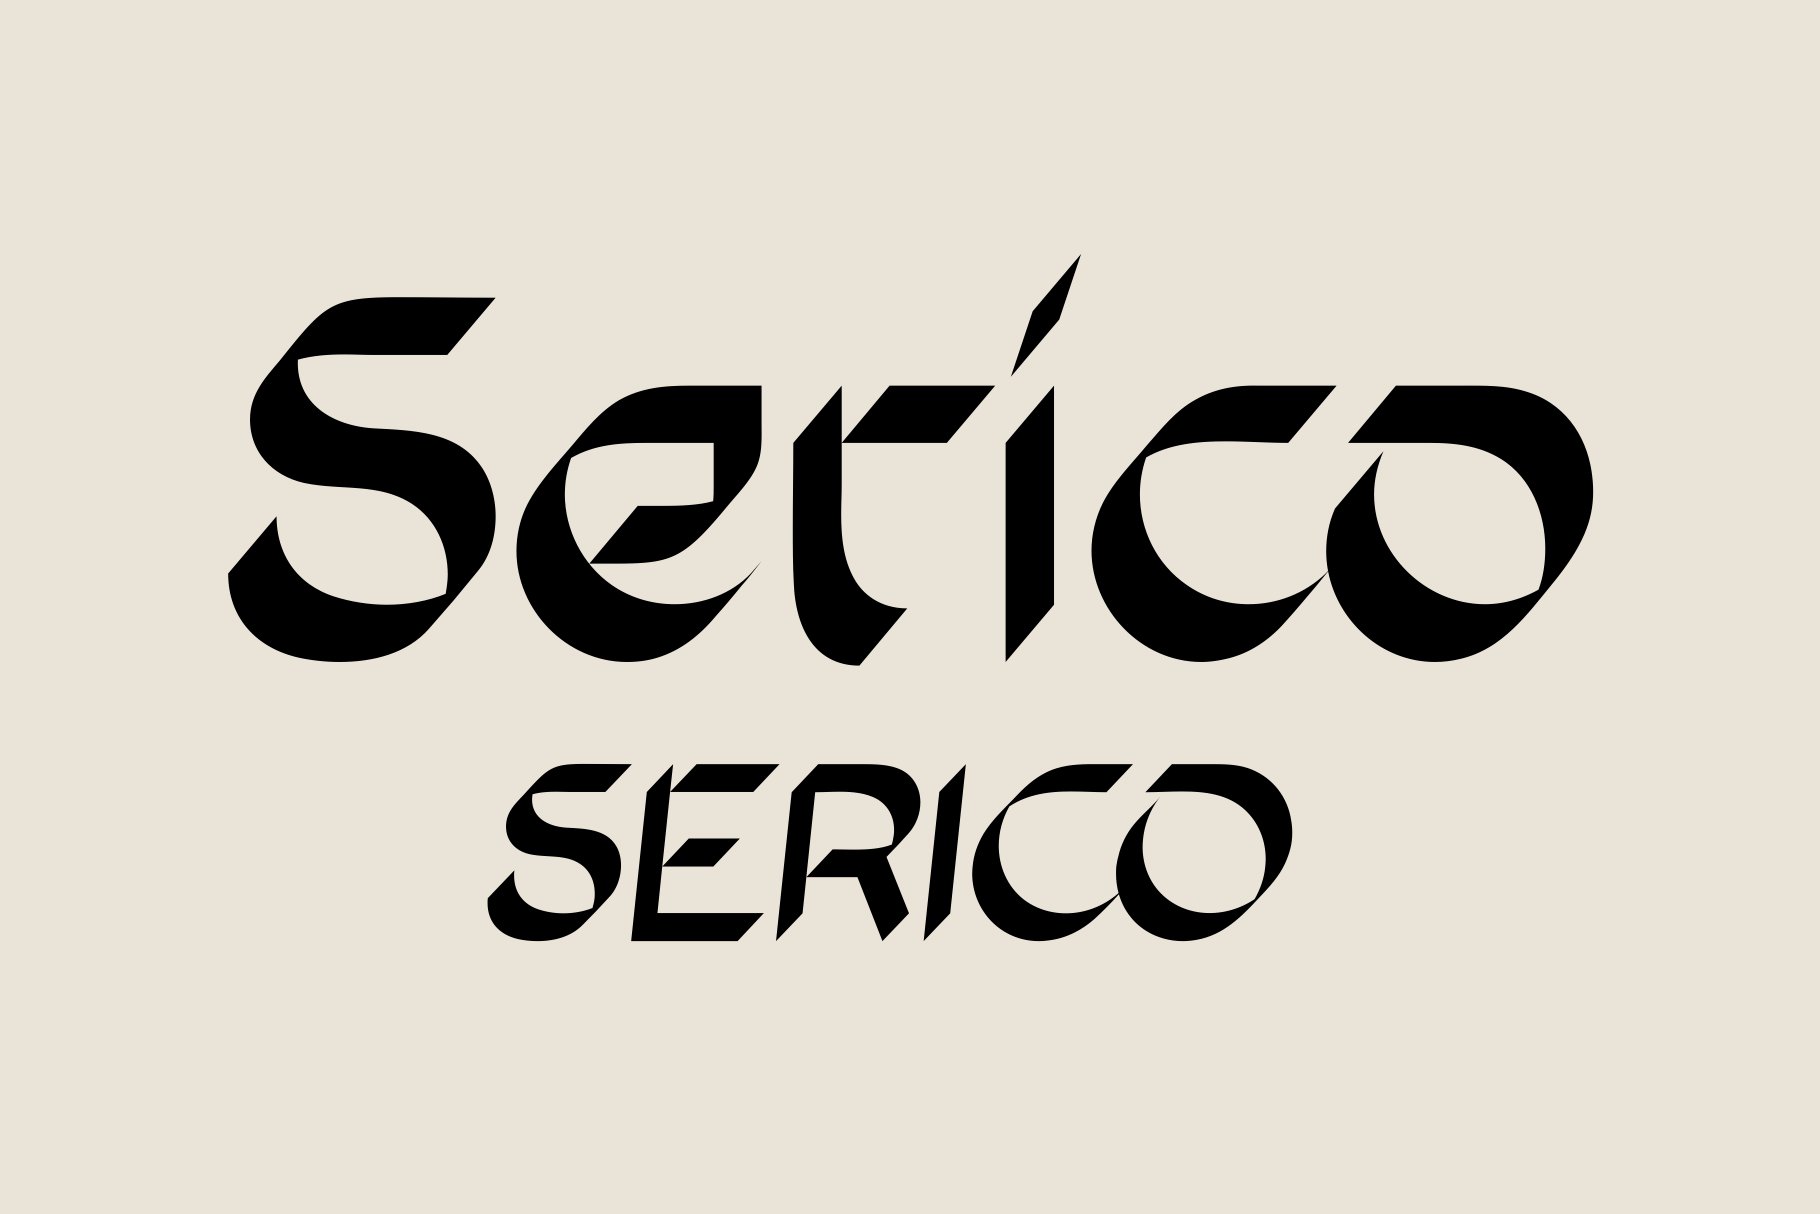 Serico – Font Family cover image.